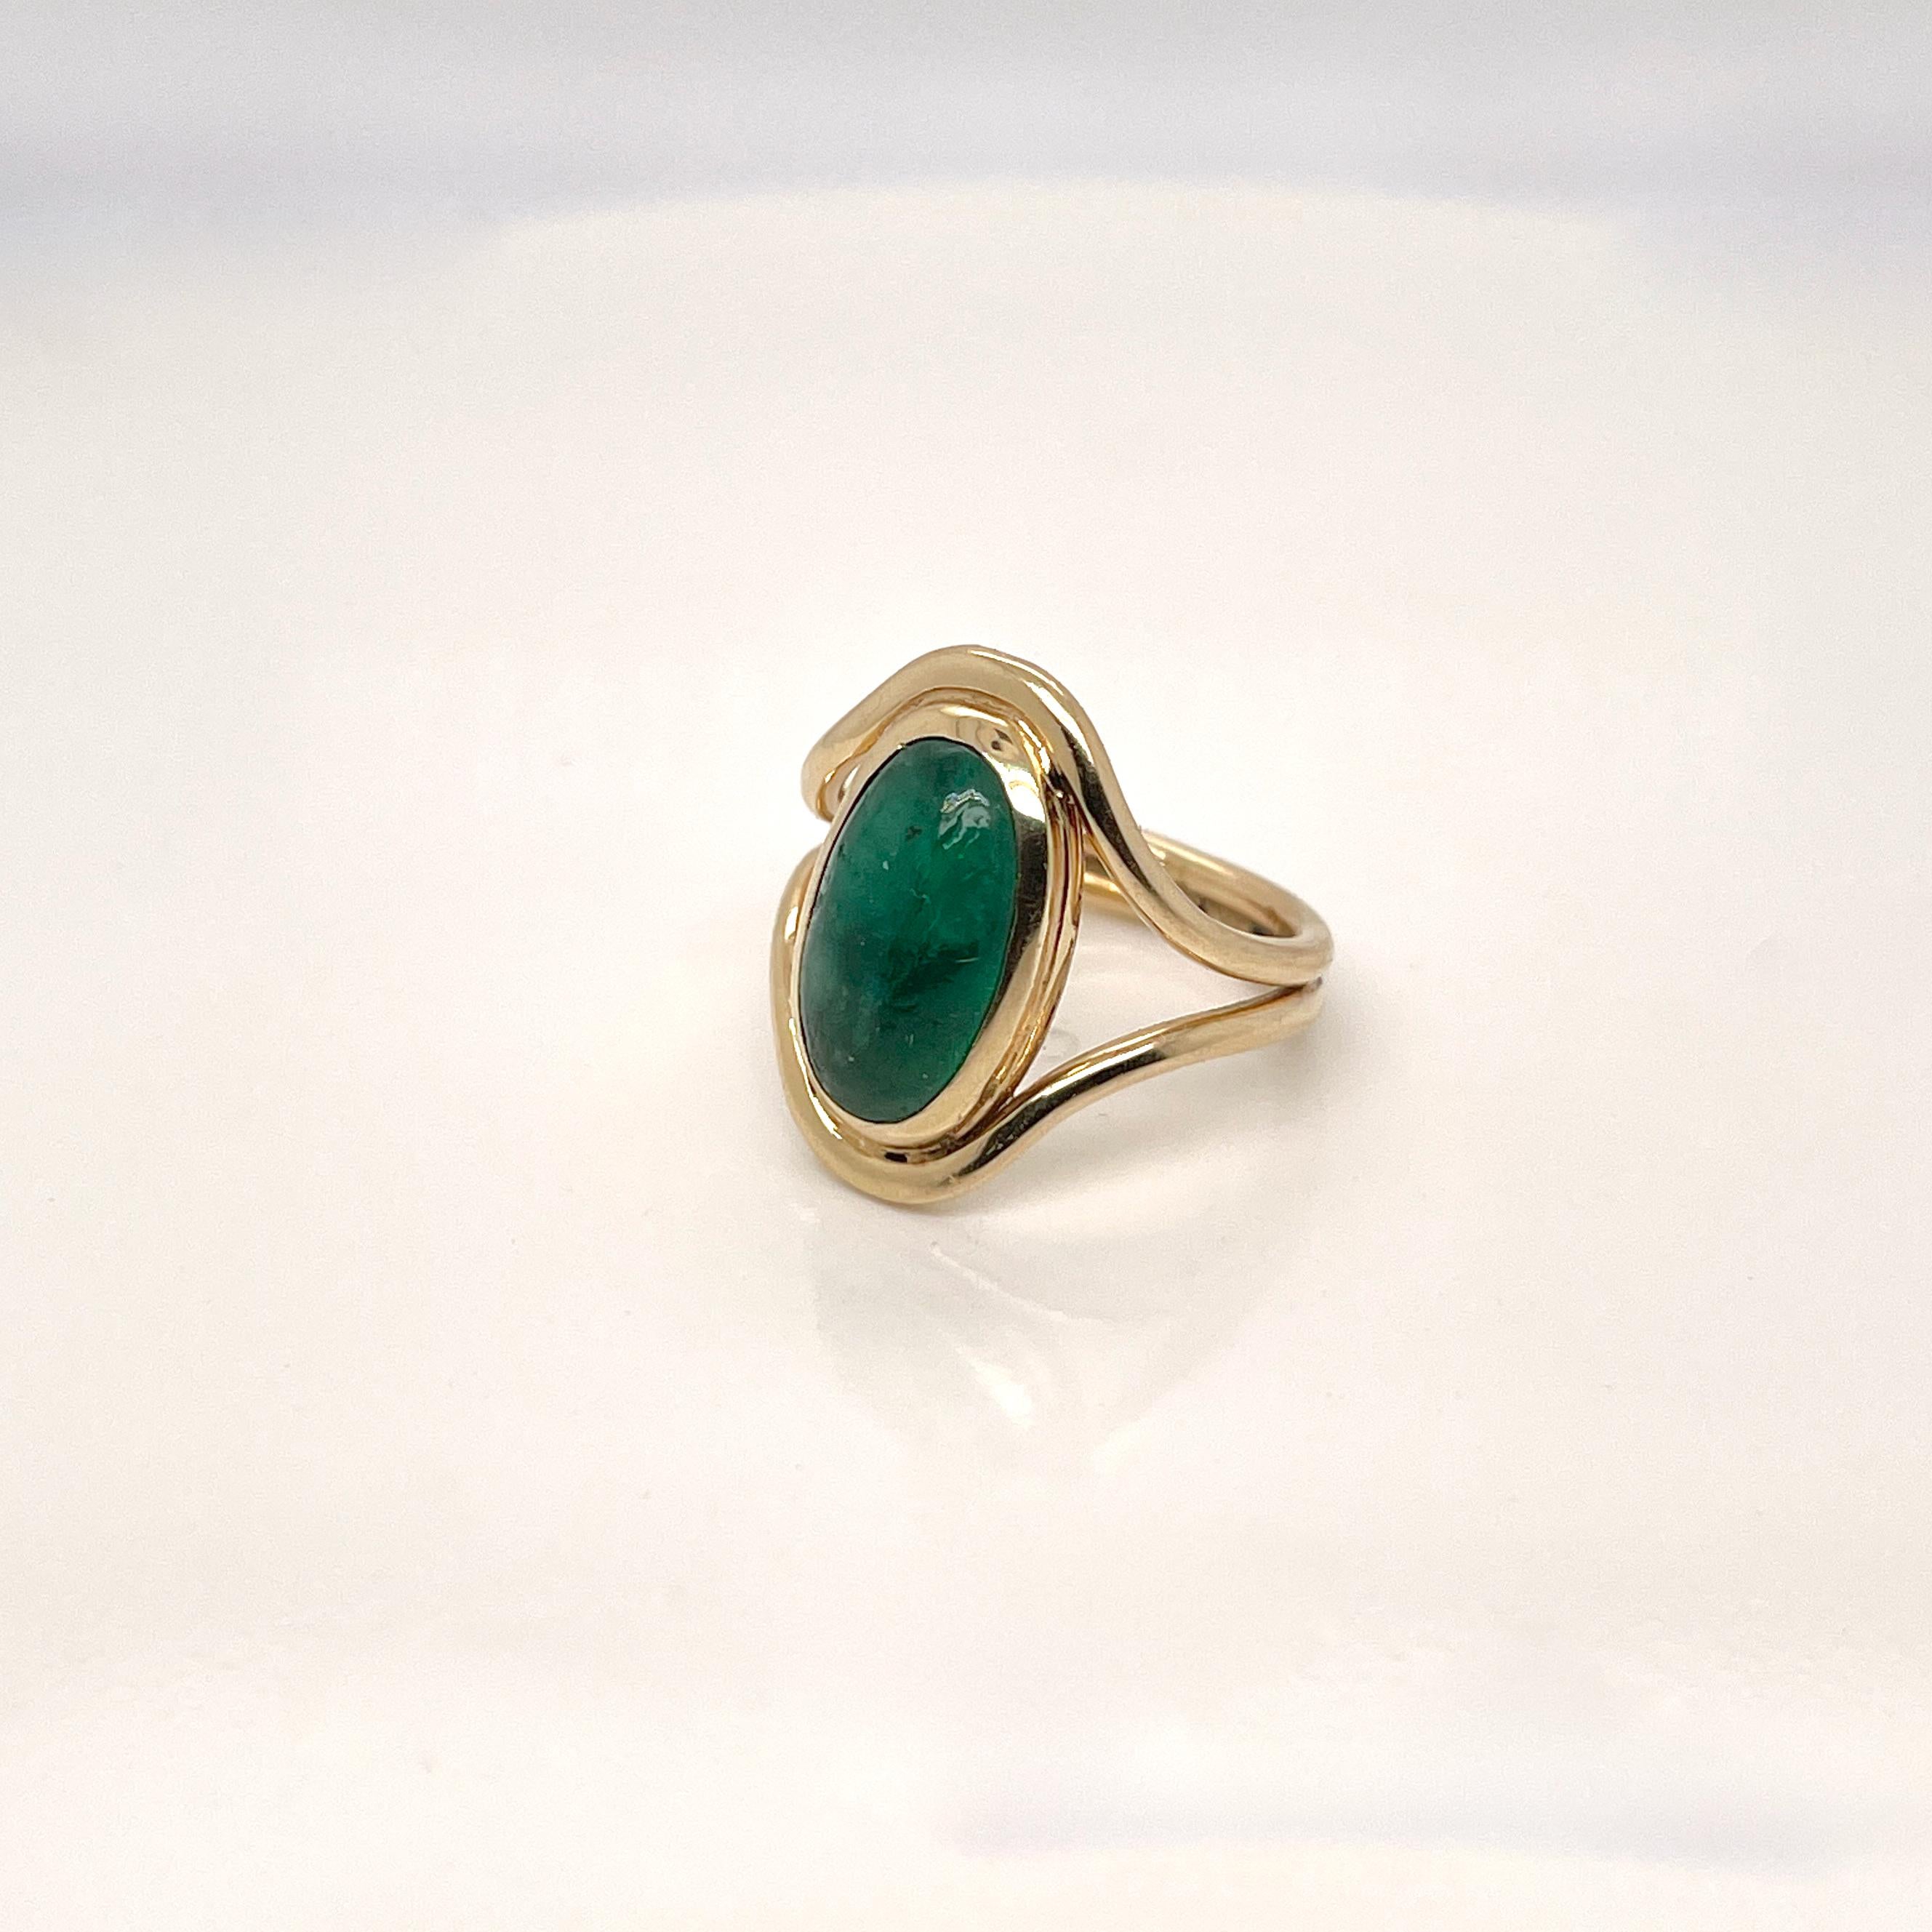 A fine Art Nouveau Signet type ring.

With a smooth oval emerald cabochon bezel set in 14k gold. 

The setting comprised of two gold bands that frame the stone and are conjoined at the bottom.

Simply a stunning emerald signet ring! 

Date:
Early